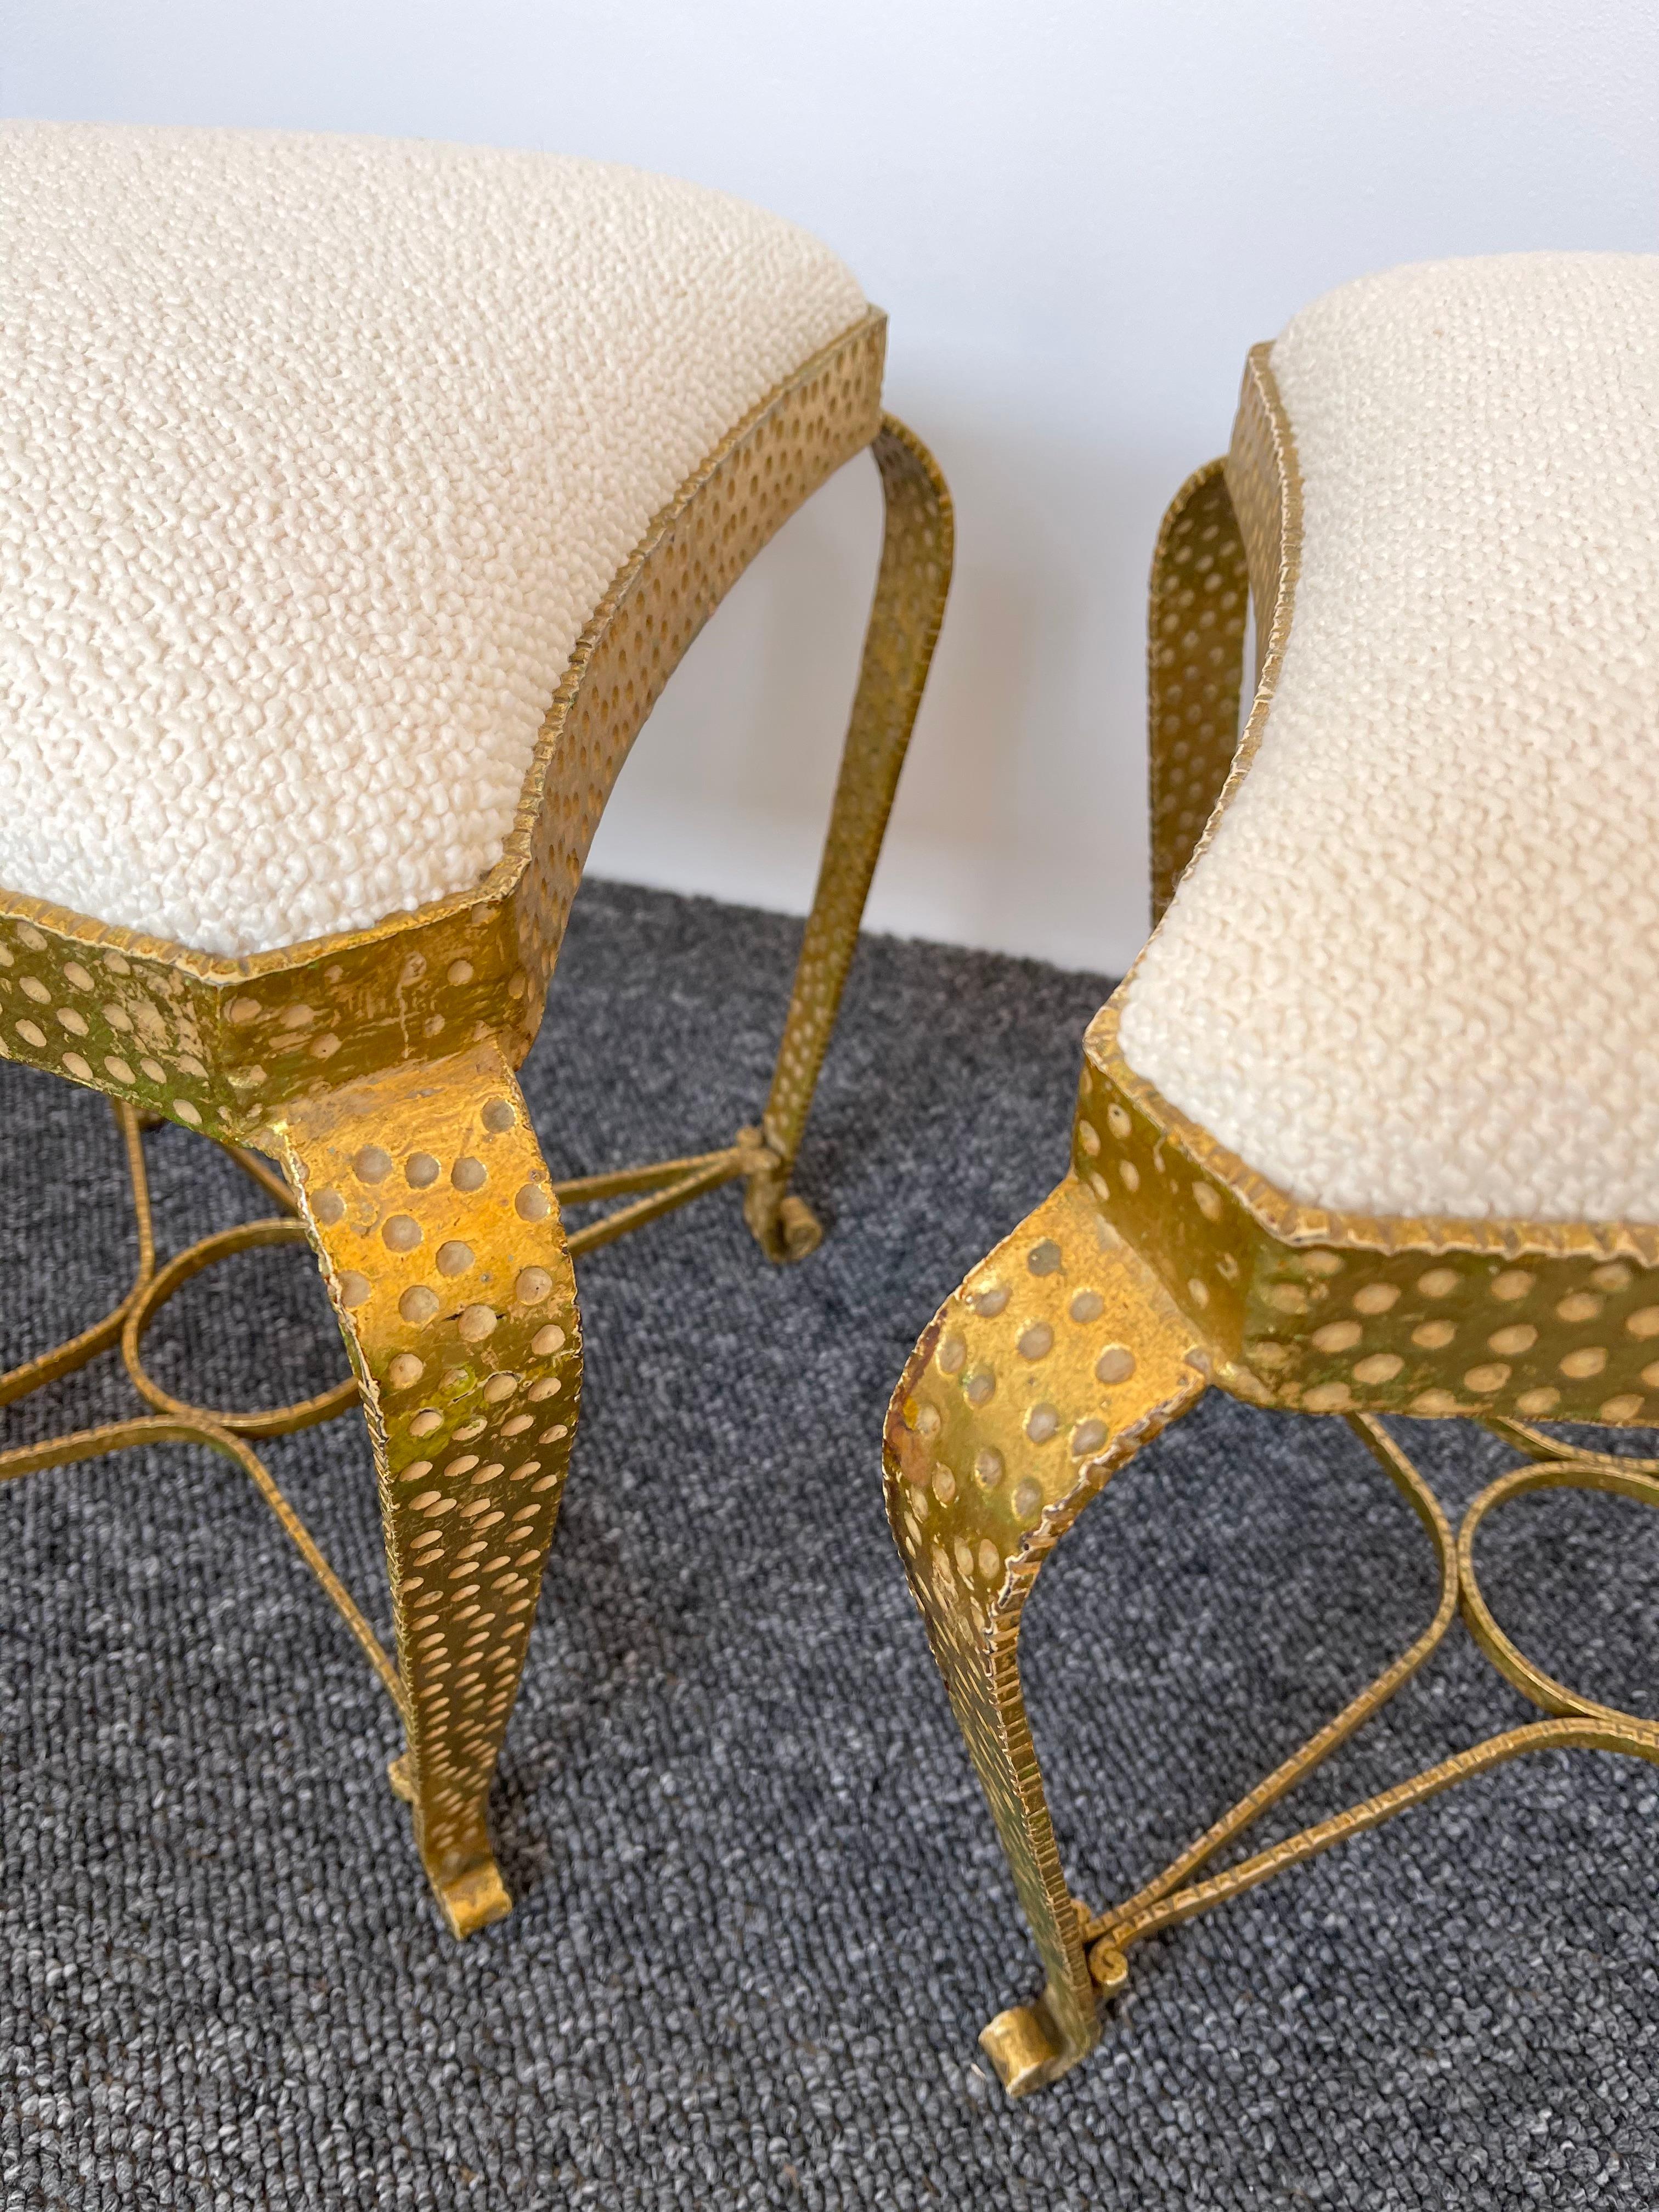 Wrought Iron Pair of Stools Gold Leaf by Pier Luigi Colli, Italy, 1950s